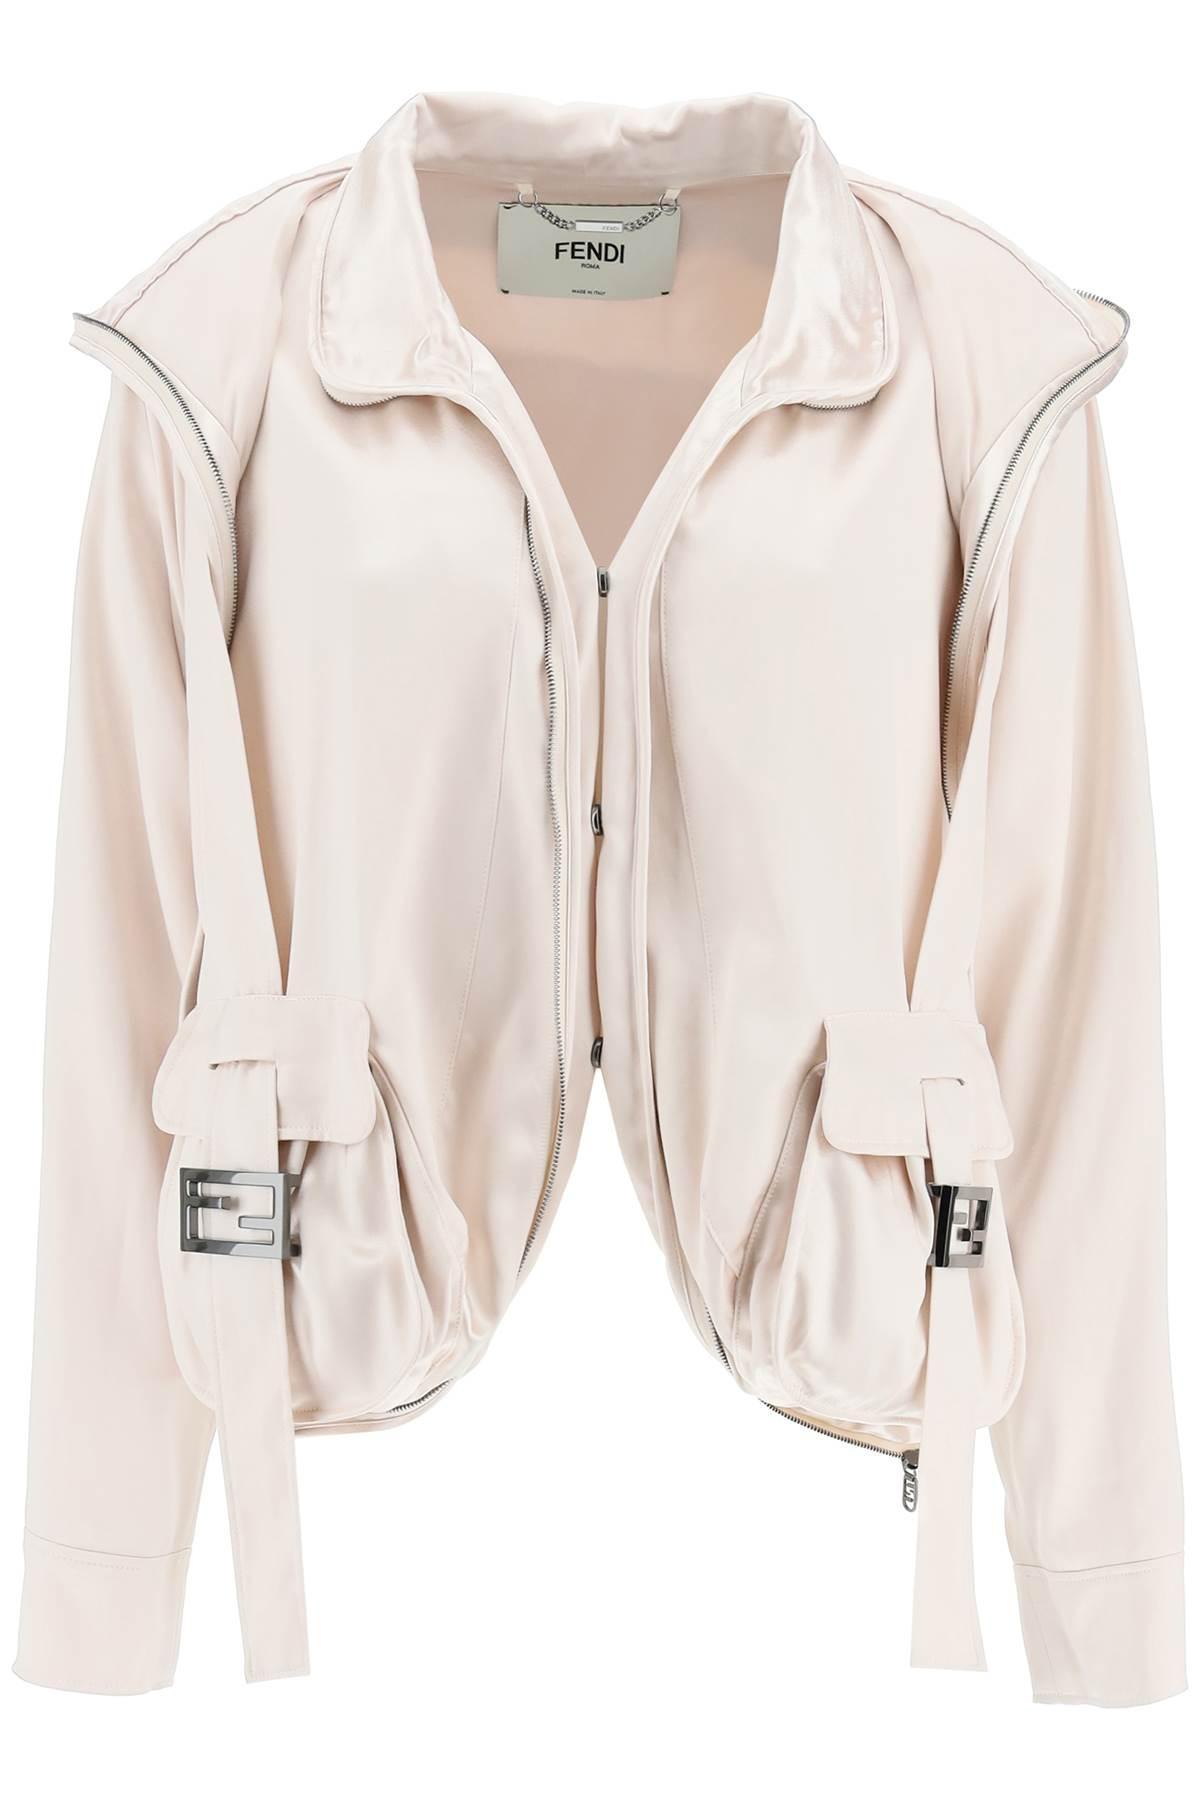 Fendi Satin Blouson Jacket With Cargo Pockets in Natural | Lyst